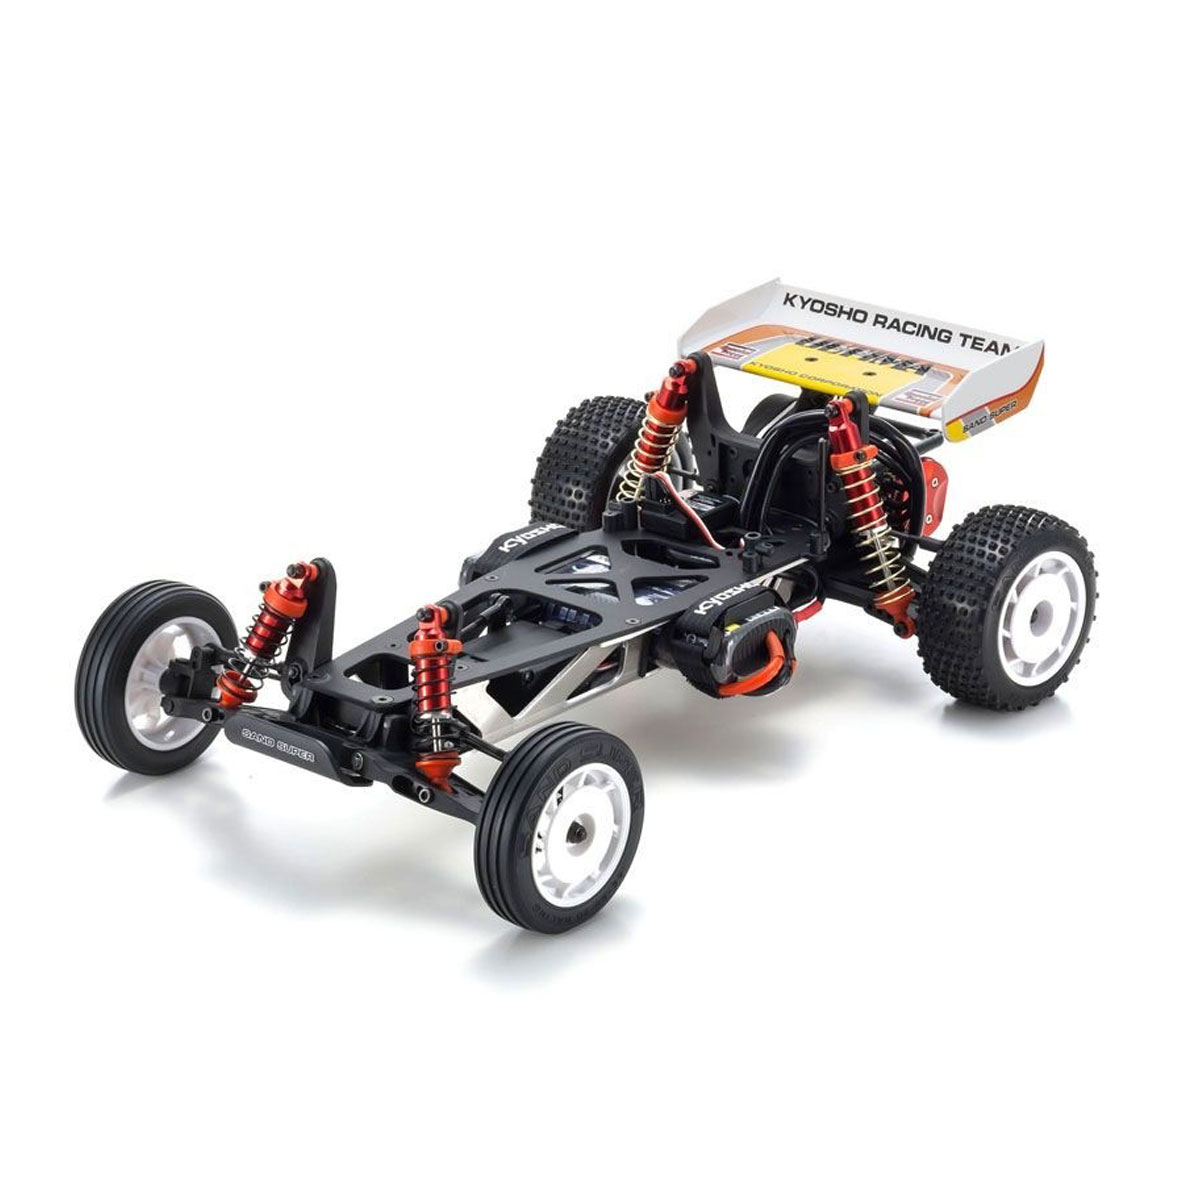 1/10 1st Ultima 2WD Off-Road Buggy Kit